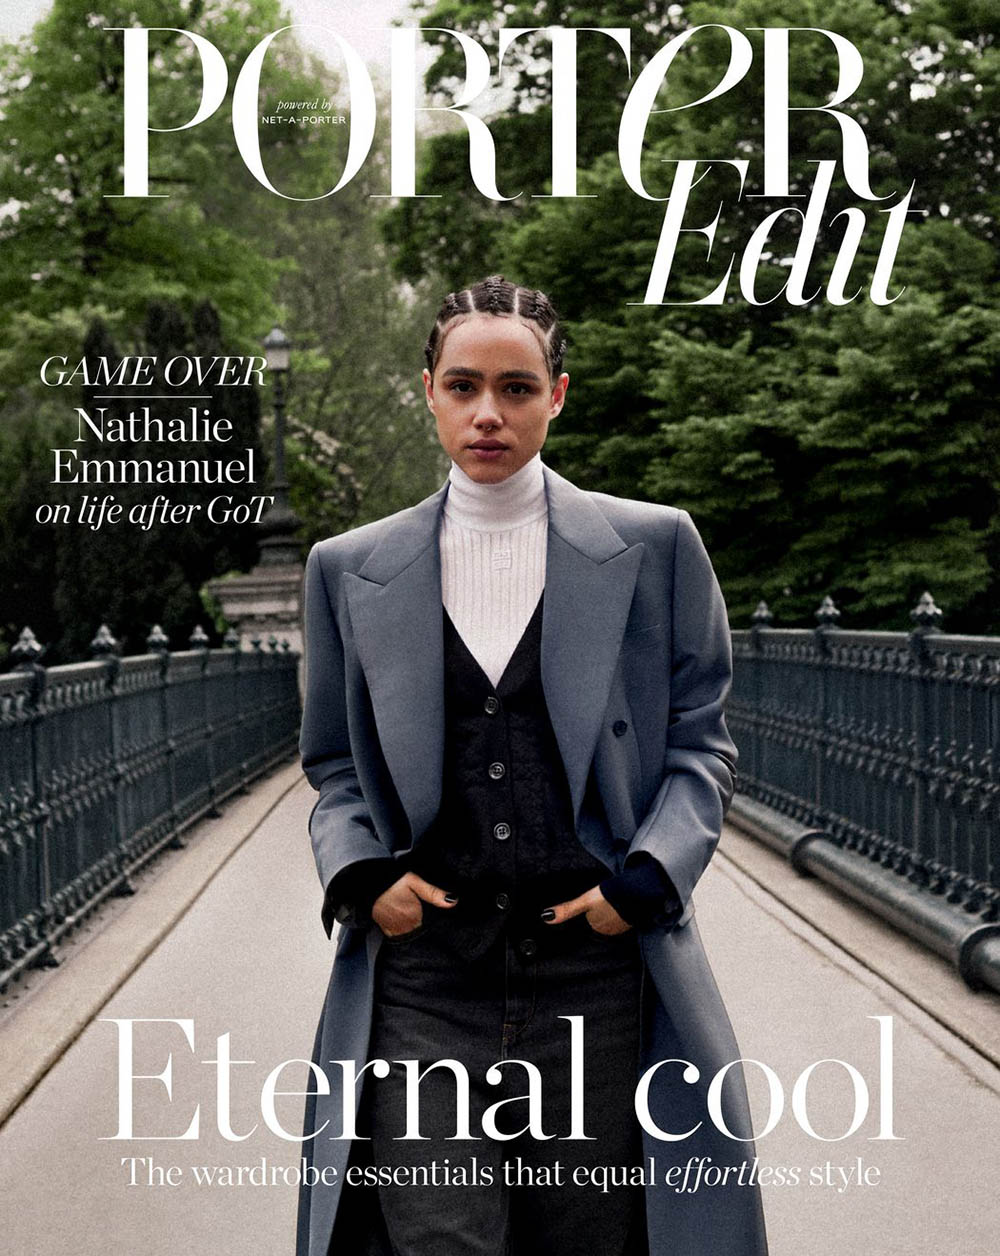 Nathalie Emmanuel covers Porter Edit May 17th, 2019 by Sonia Szóstak